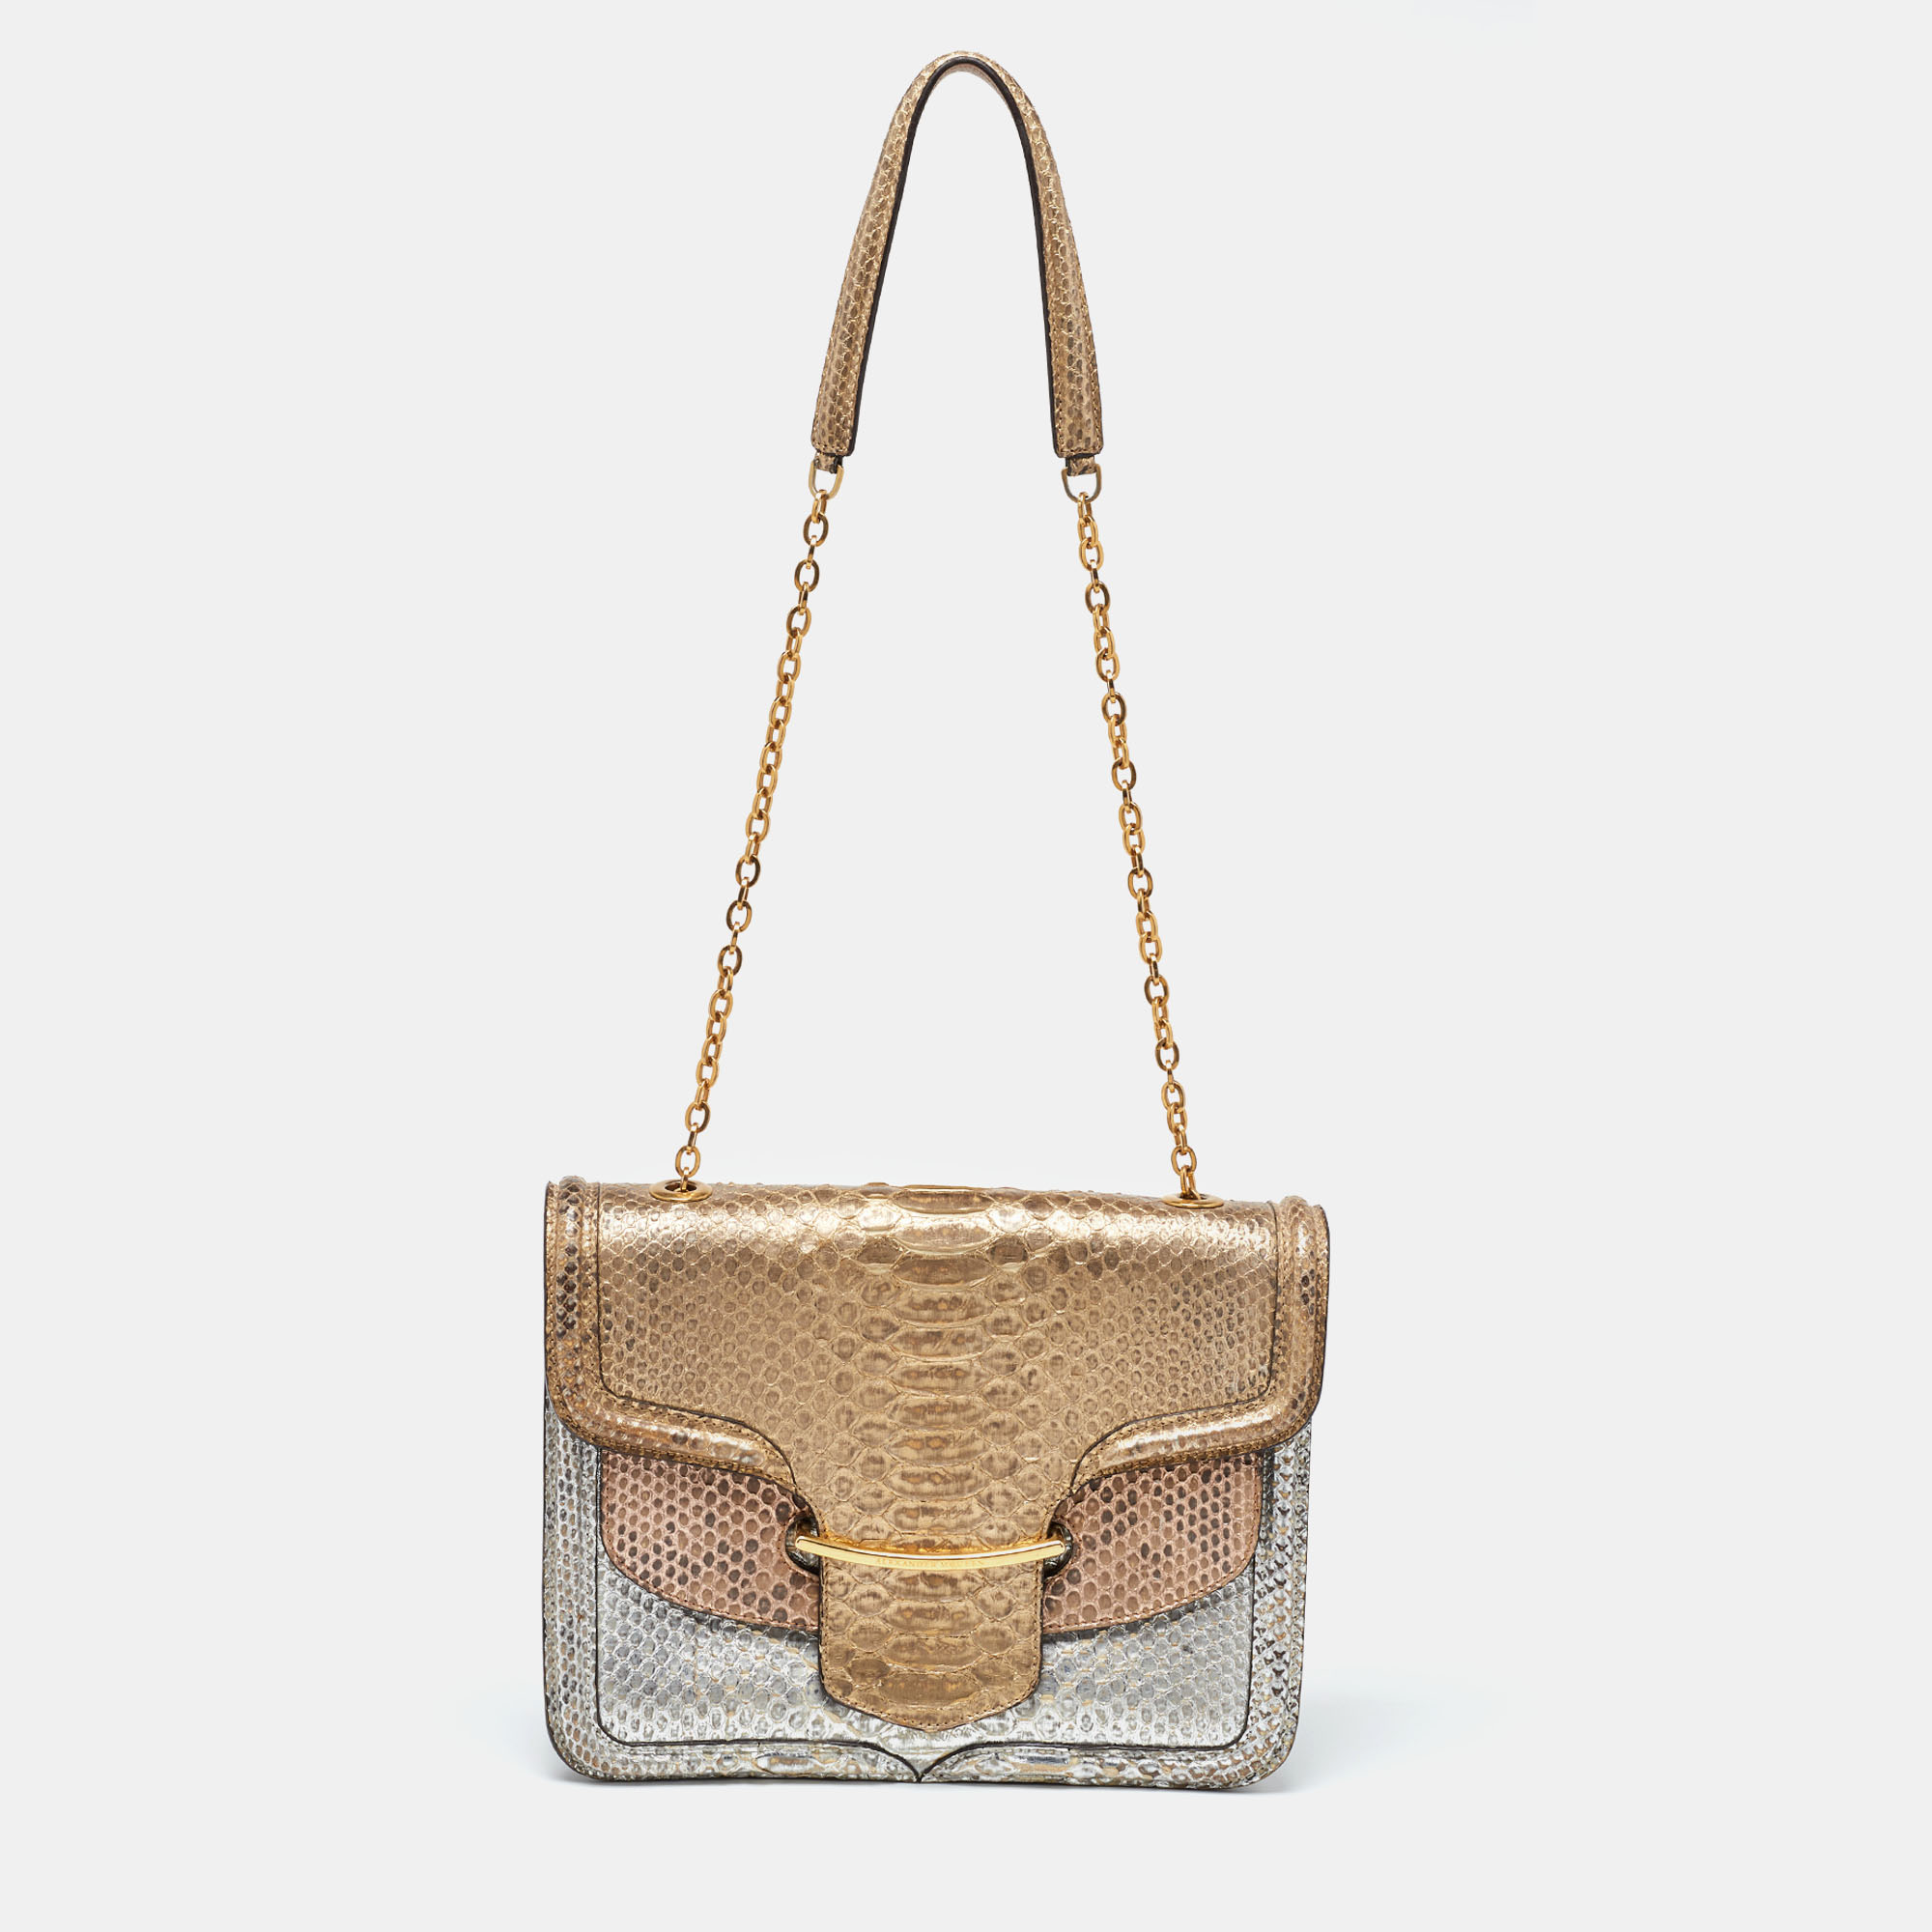 Designer bags are ideal companions for ample occasions Here we have a fashion meets functionality piece crafted with precision. It has been equipped with a well sized interior that can easily fit all your essentials.